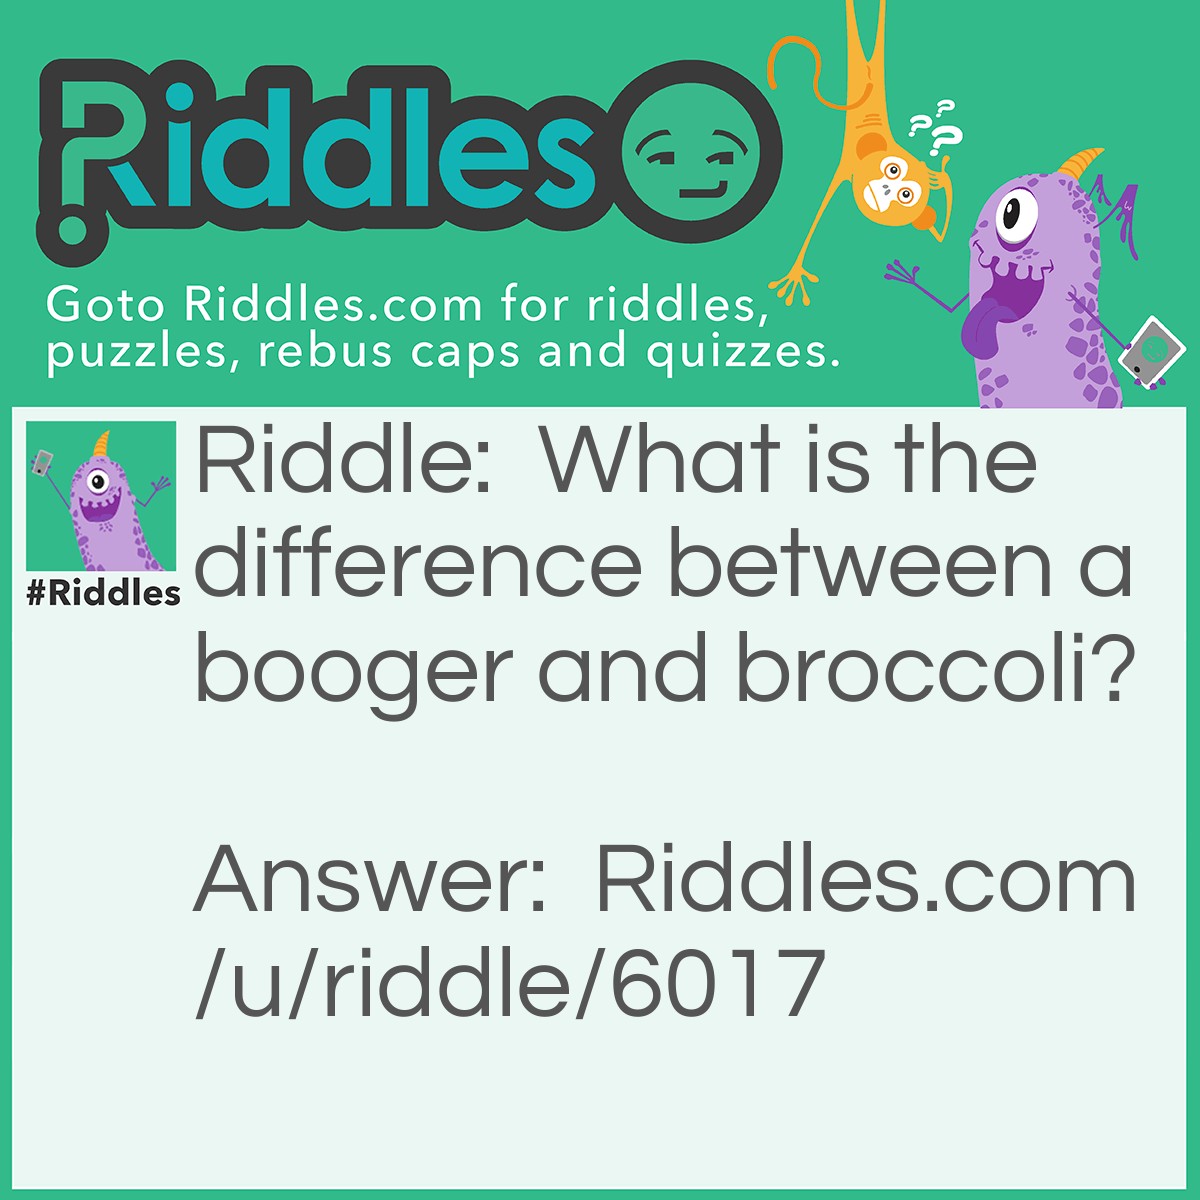 Riddle: What is the difference between a booger and broccoli? Answer: Kids won't eat broccoli.